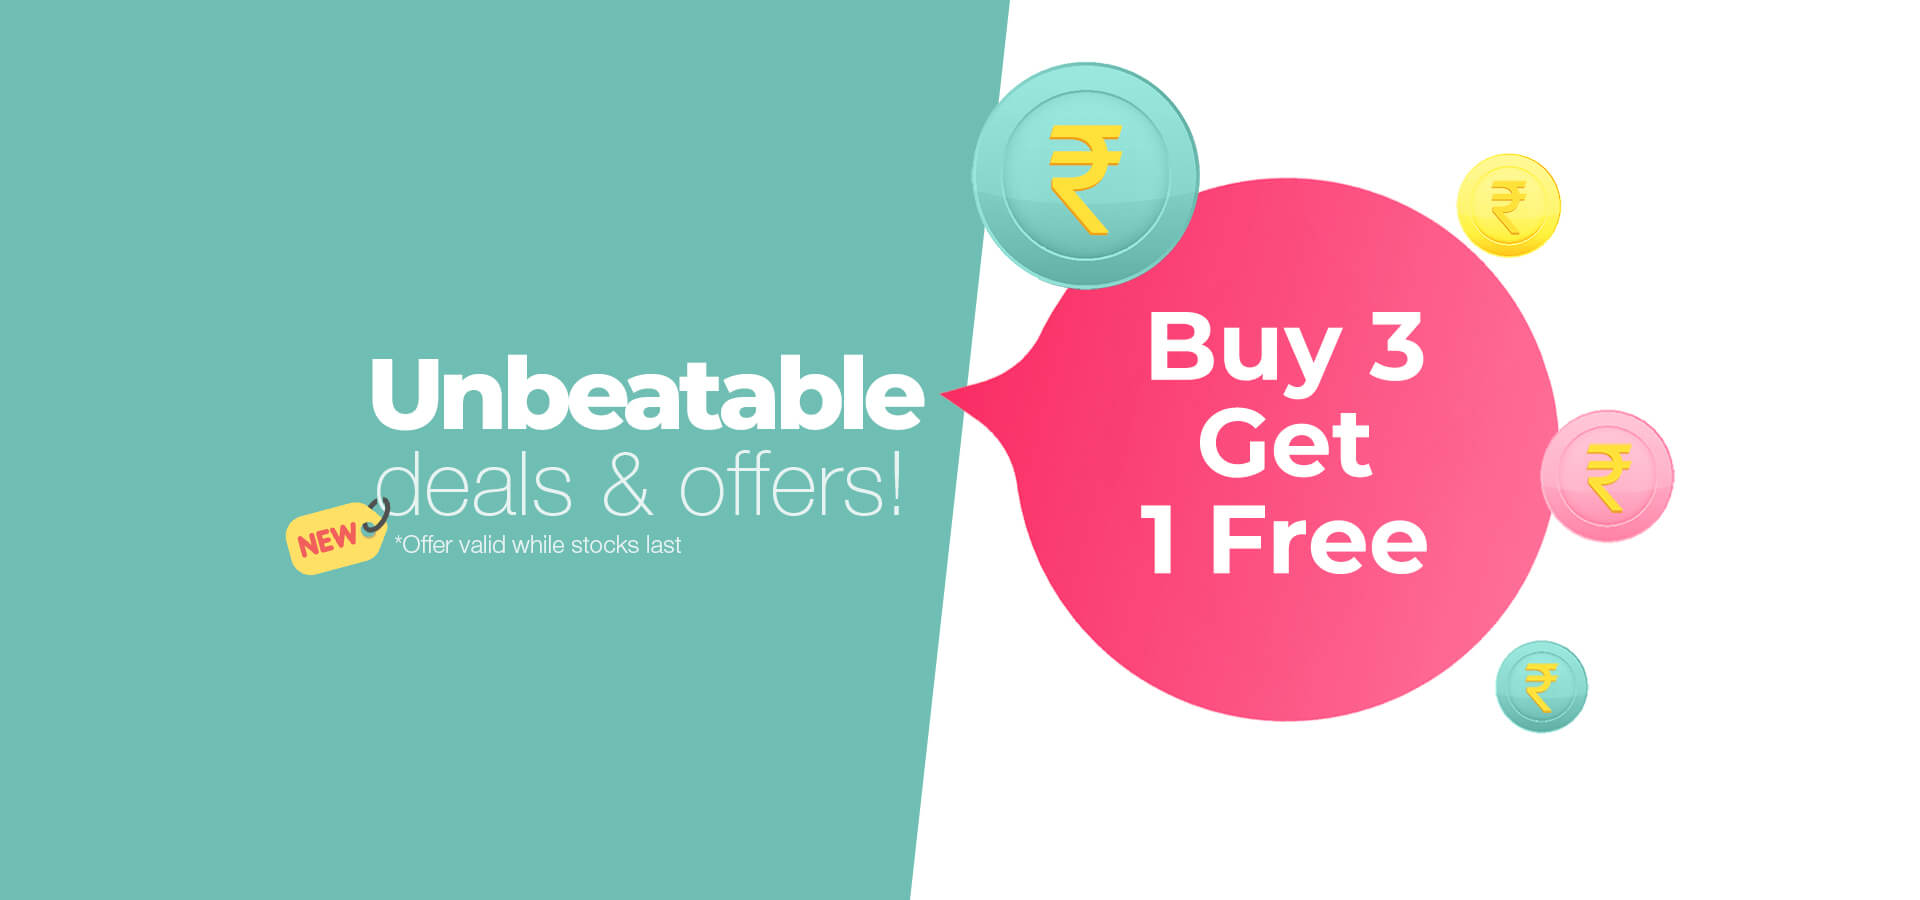 Unbeatable Deals and Offers - Buy 3, Get 1 Free!